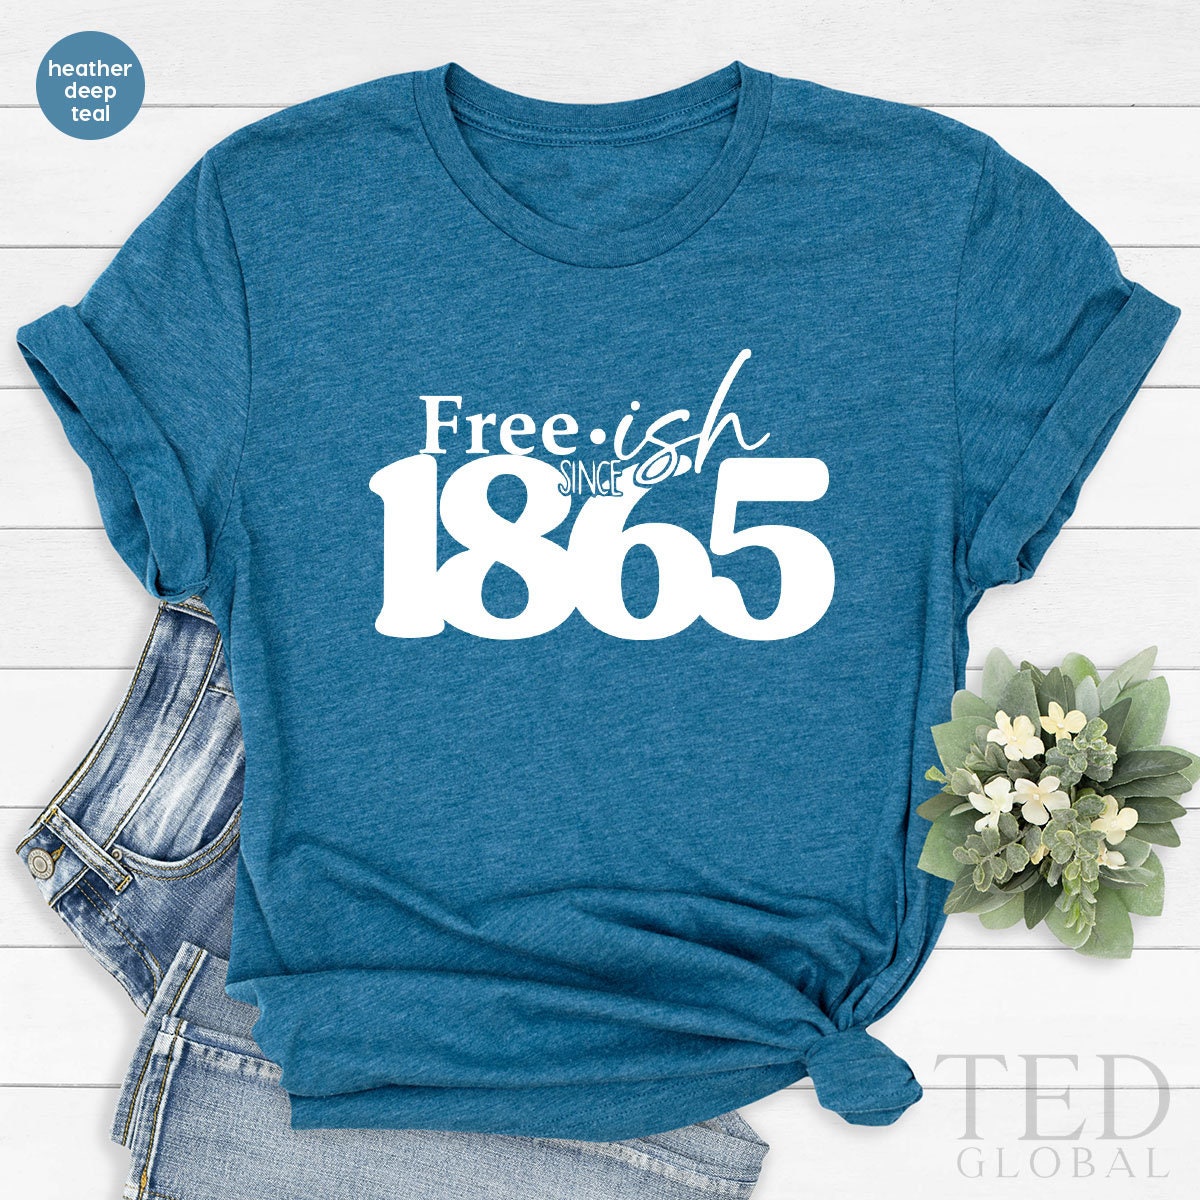 Juneteenth Shirt, Black Culture T Shirt, Free-ish  1865 TShirt,  Black History, Proud African American, Black Live Matter, Independence Day - Fastdeliverytees.com